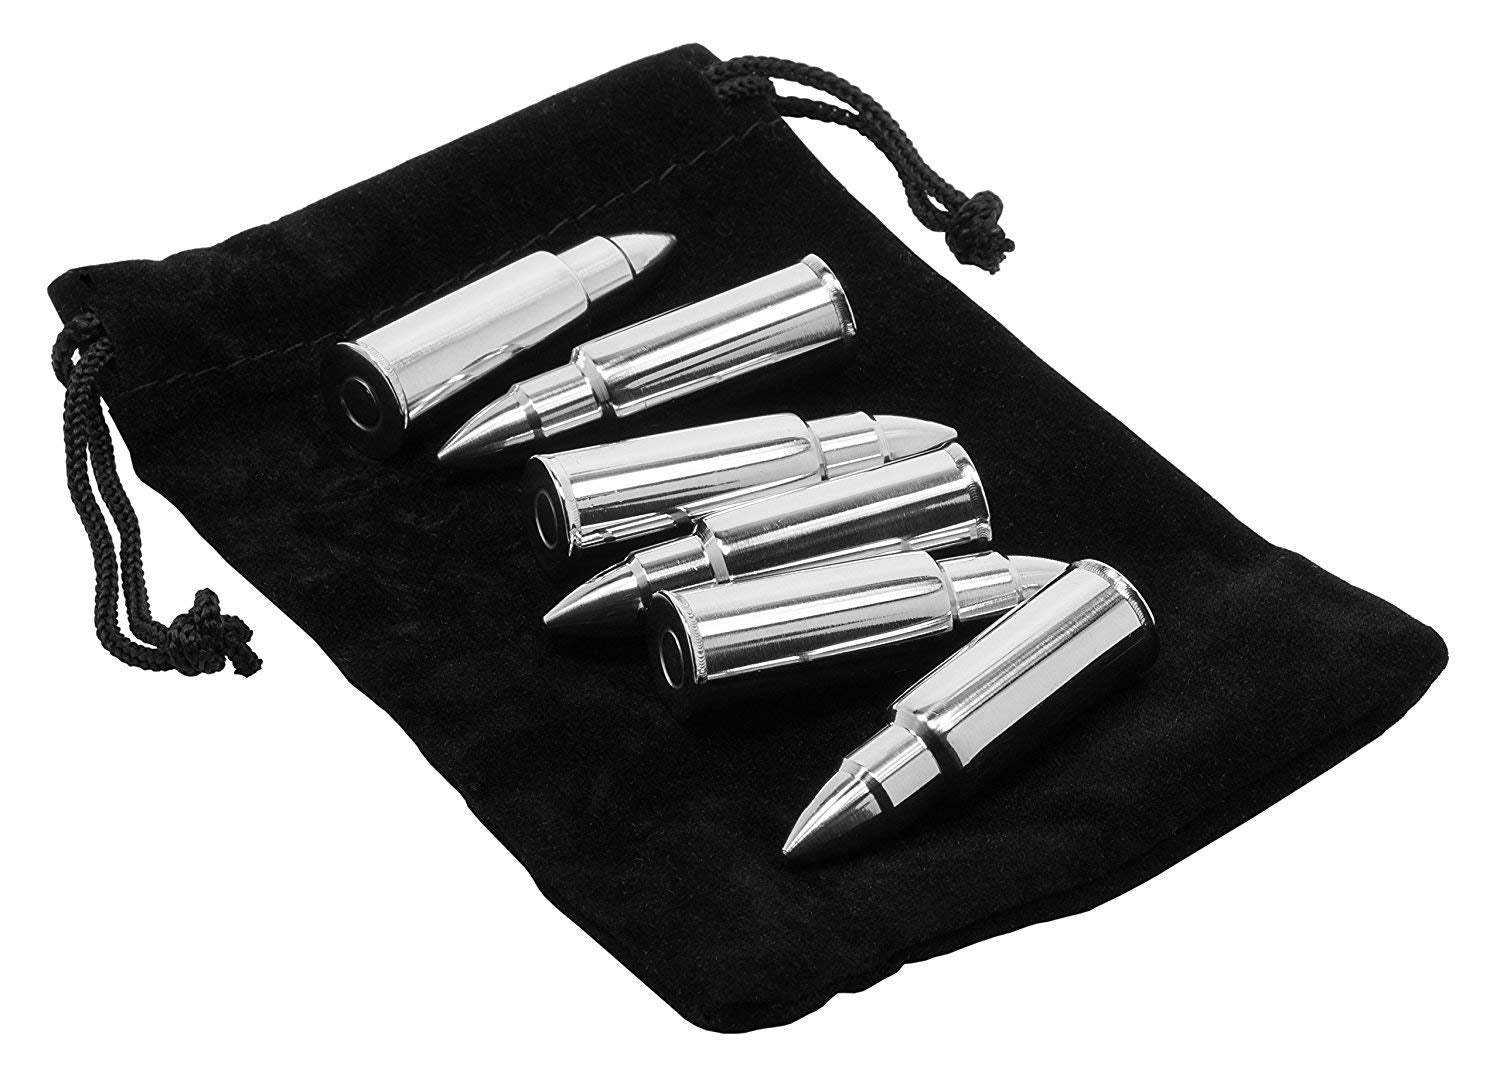 Emerge Bullet Shaped Chilling Whiskey Stones- Stainless Steel- Set of 6